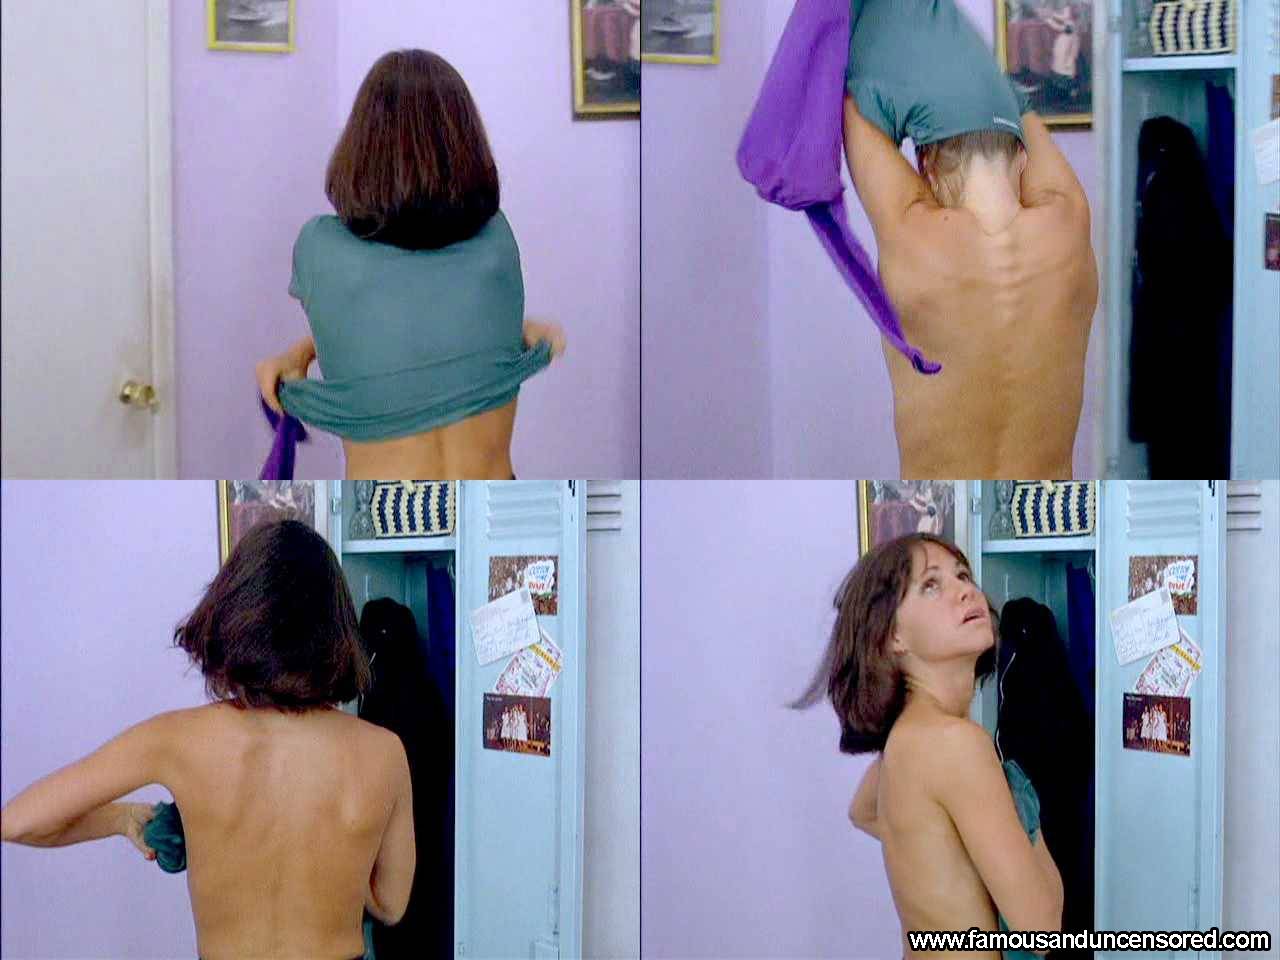 Naked pictures of sally fields